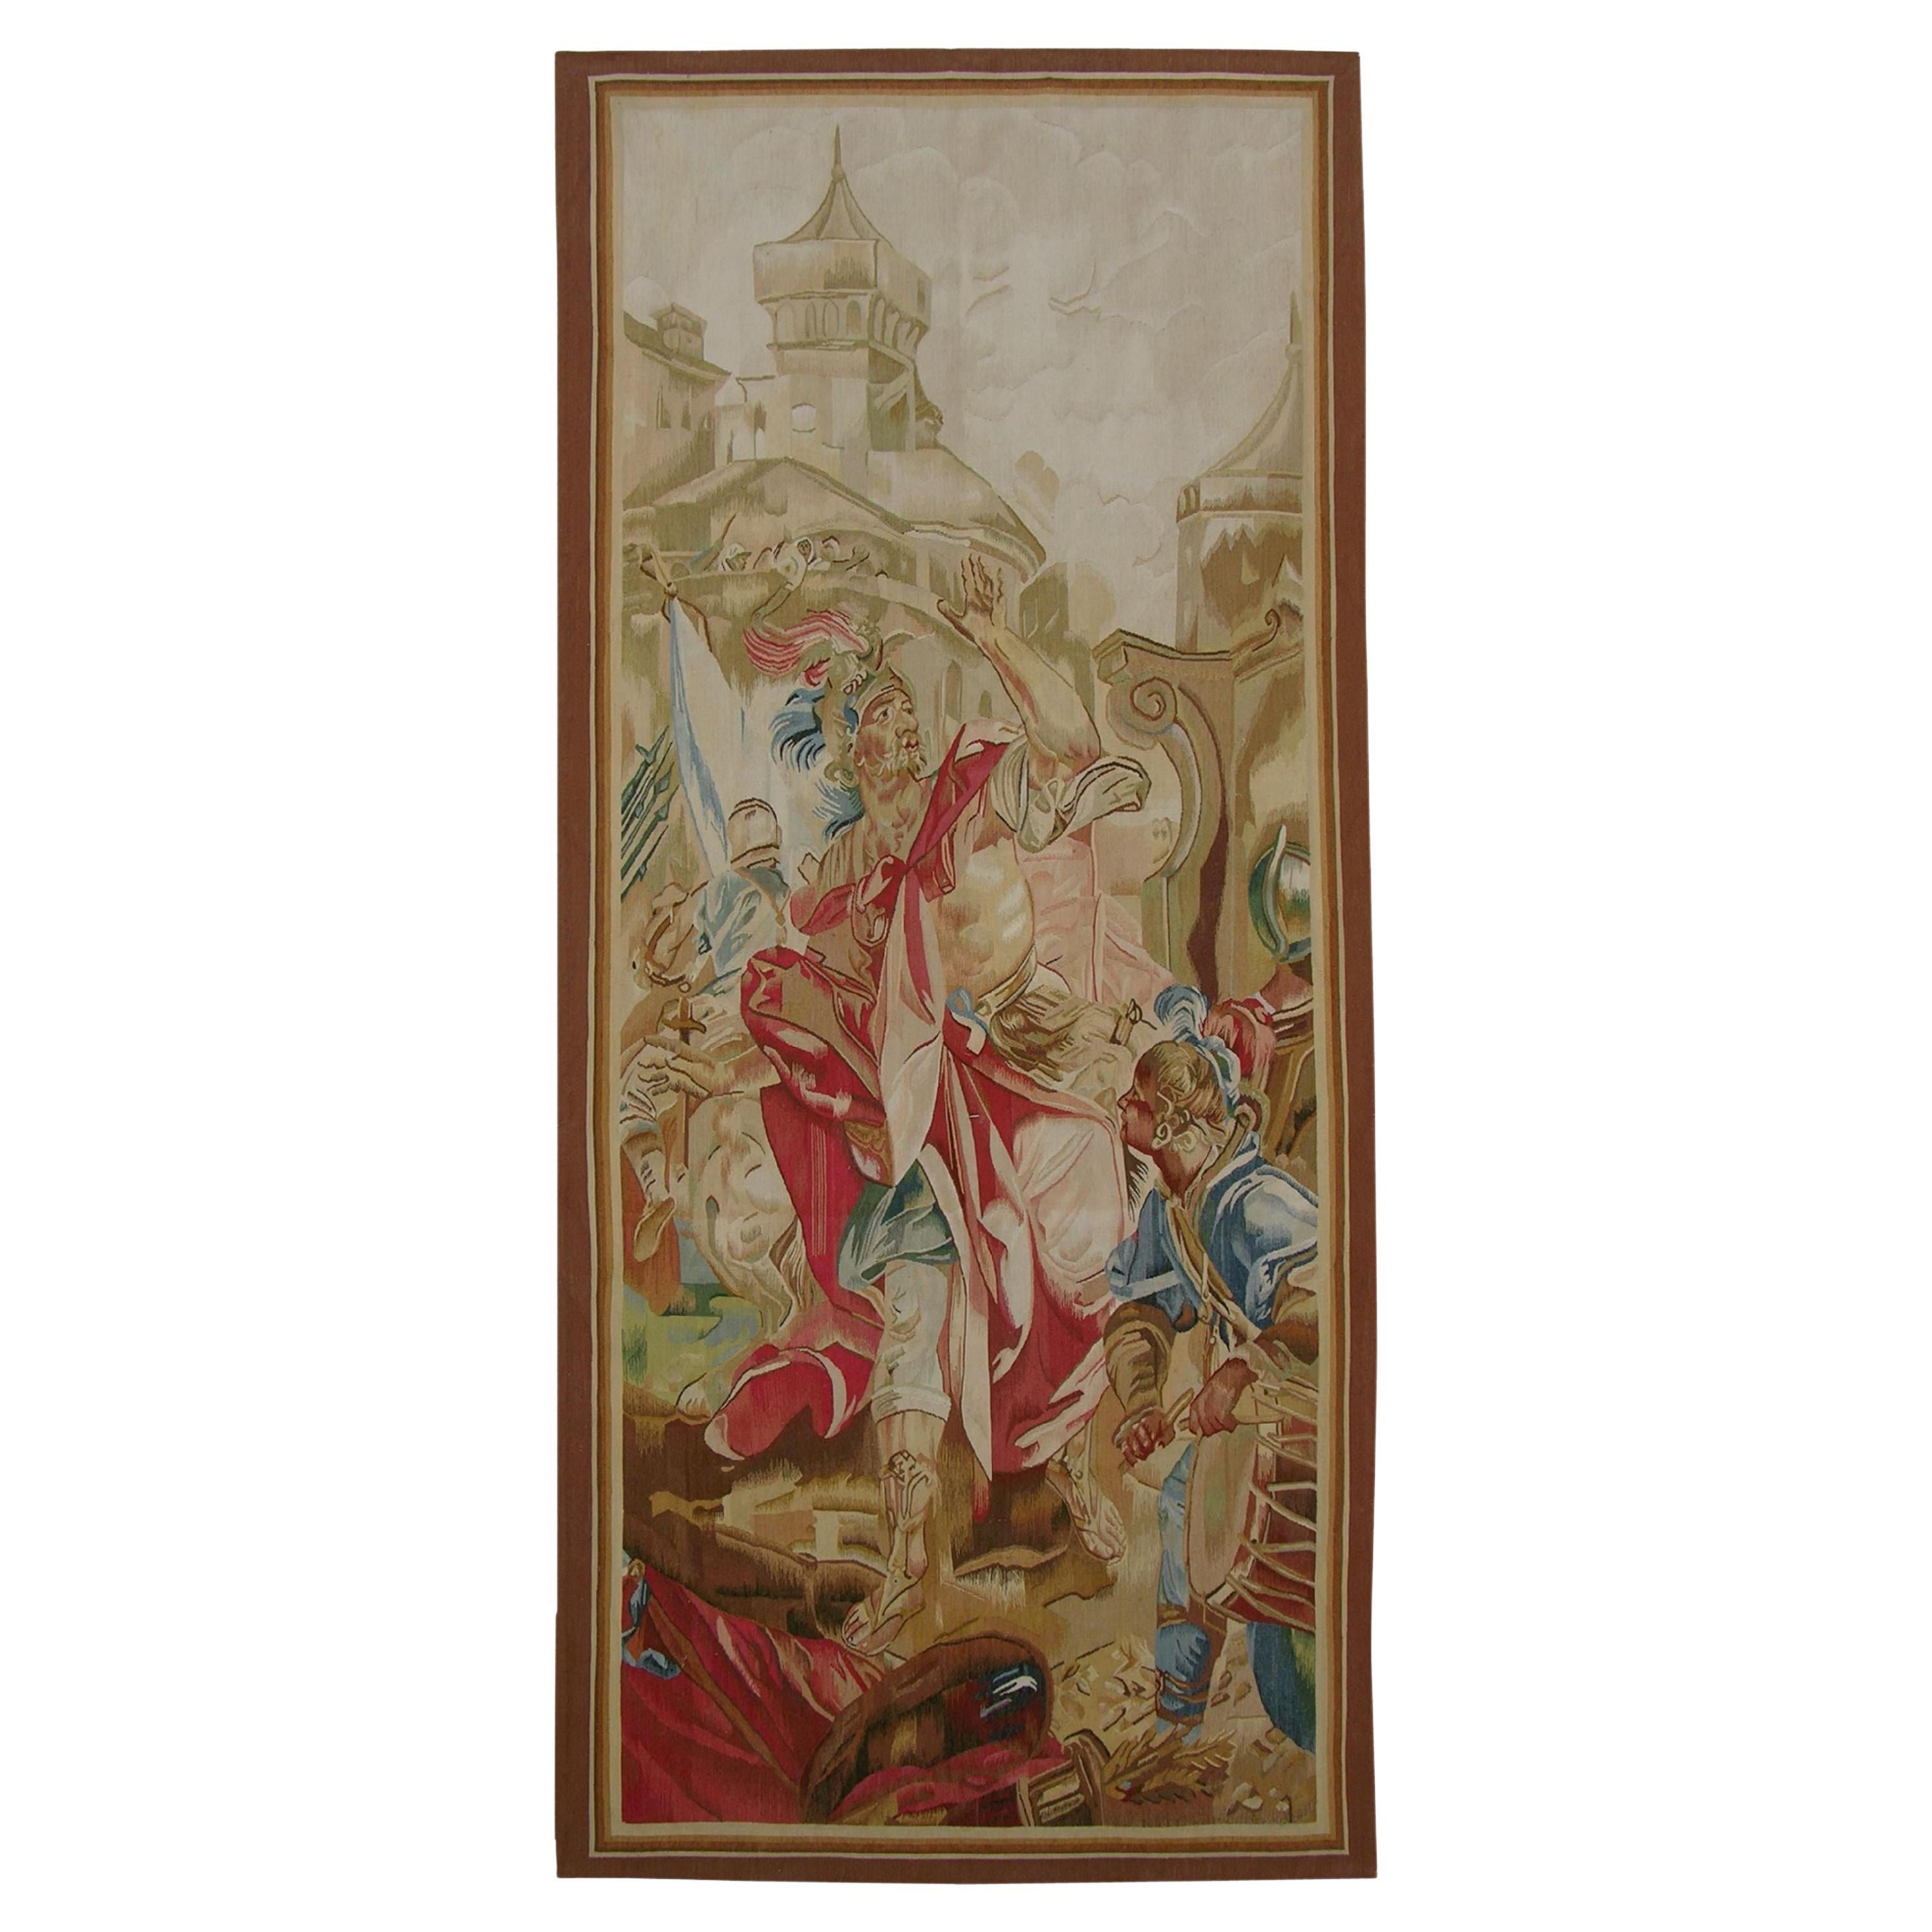 Vintage Tapestry Depicting a Gladiator in Action 8' X 3'6"